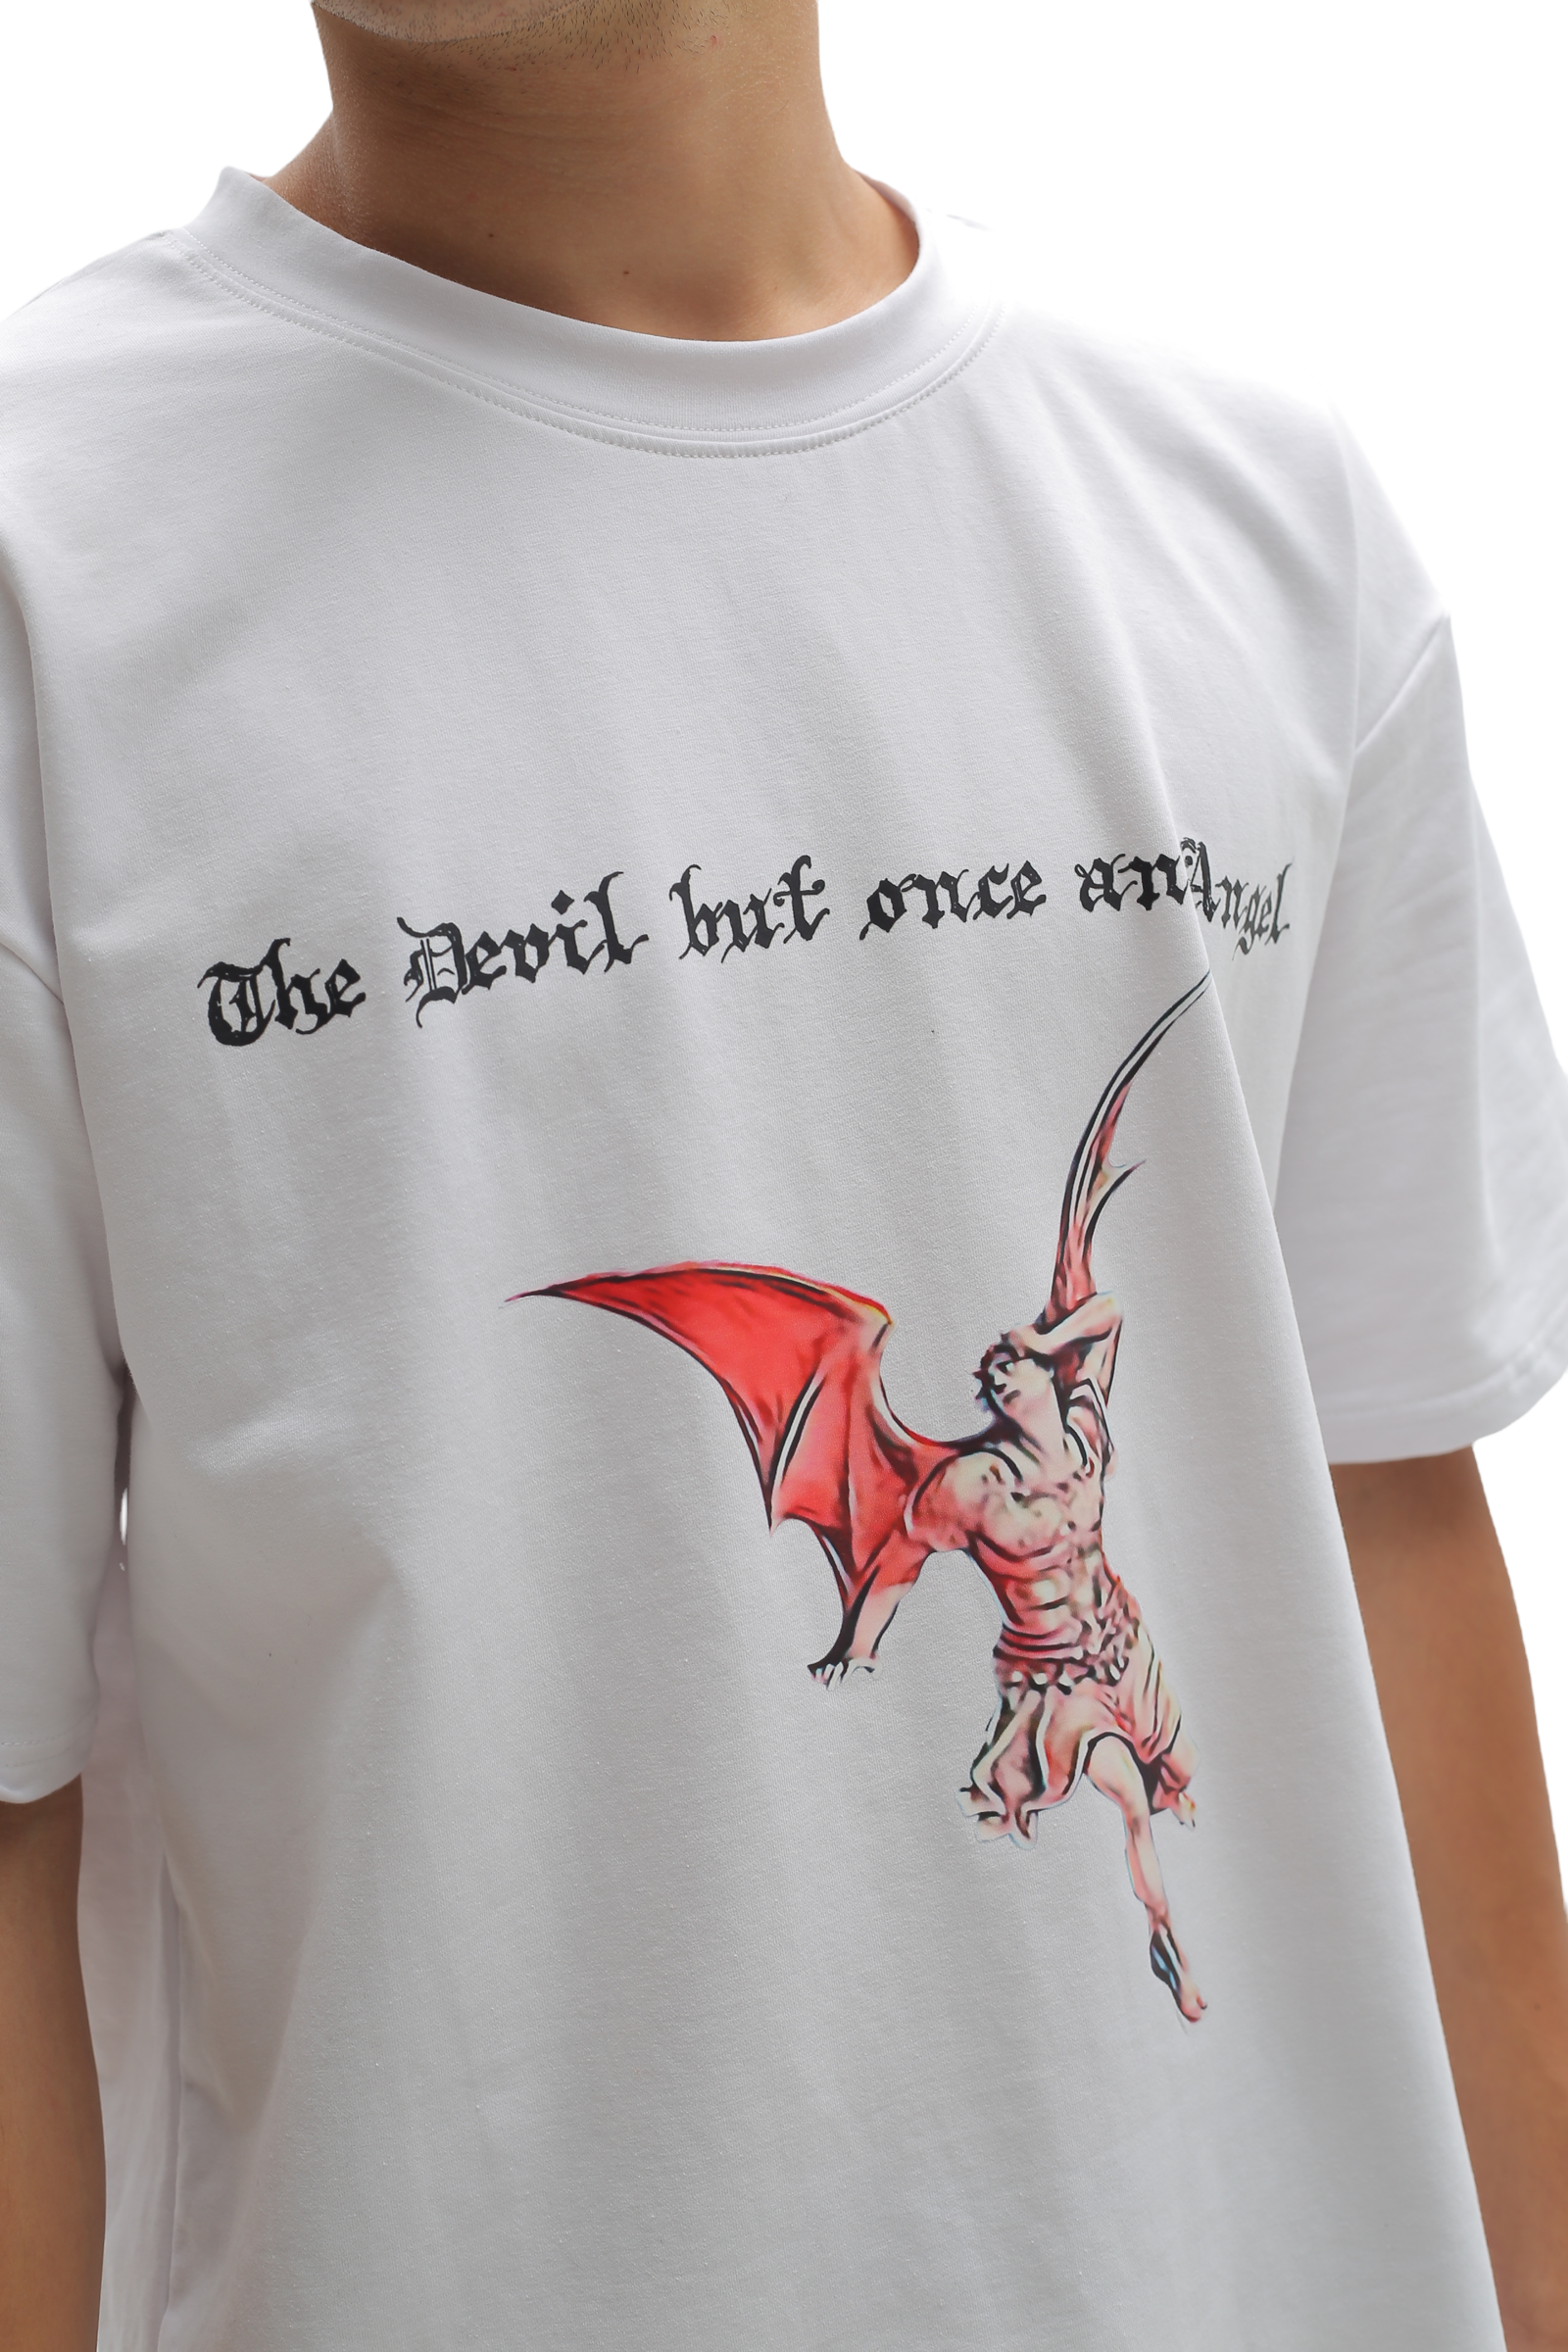 The Devil but Once an Angel - T-Shirt - White